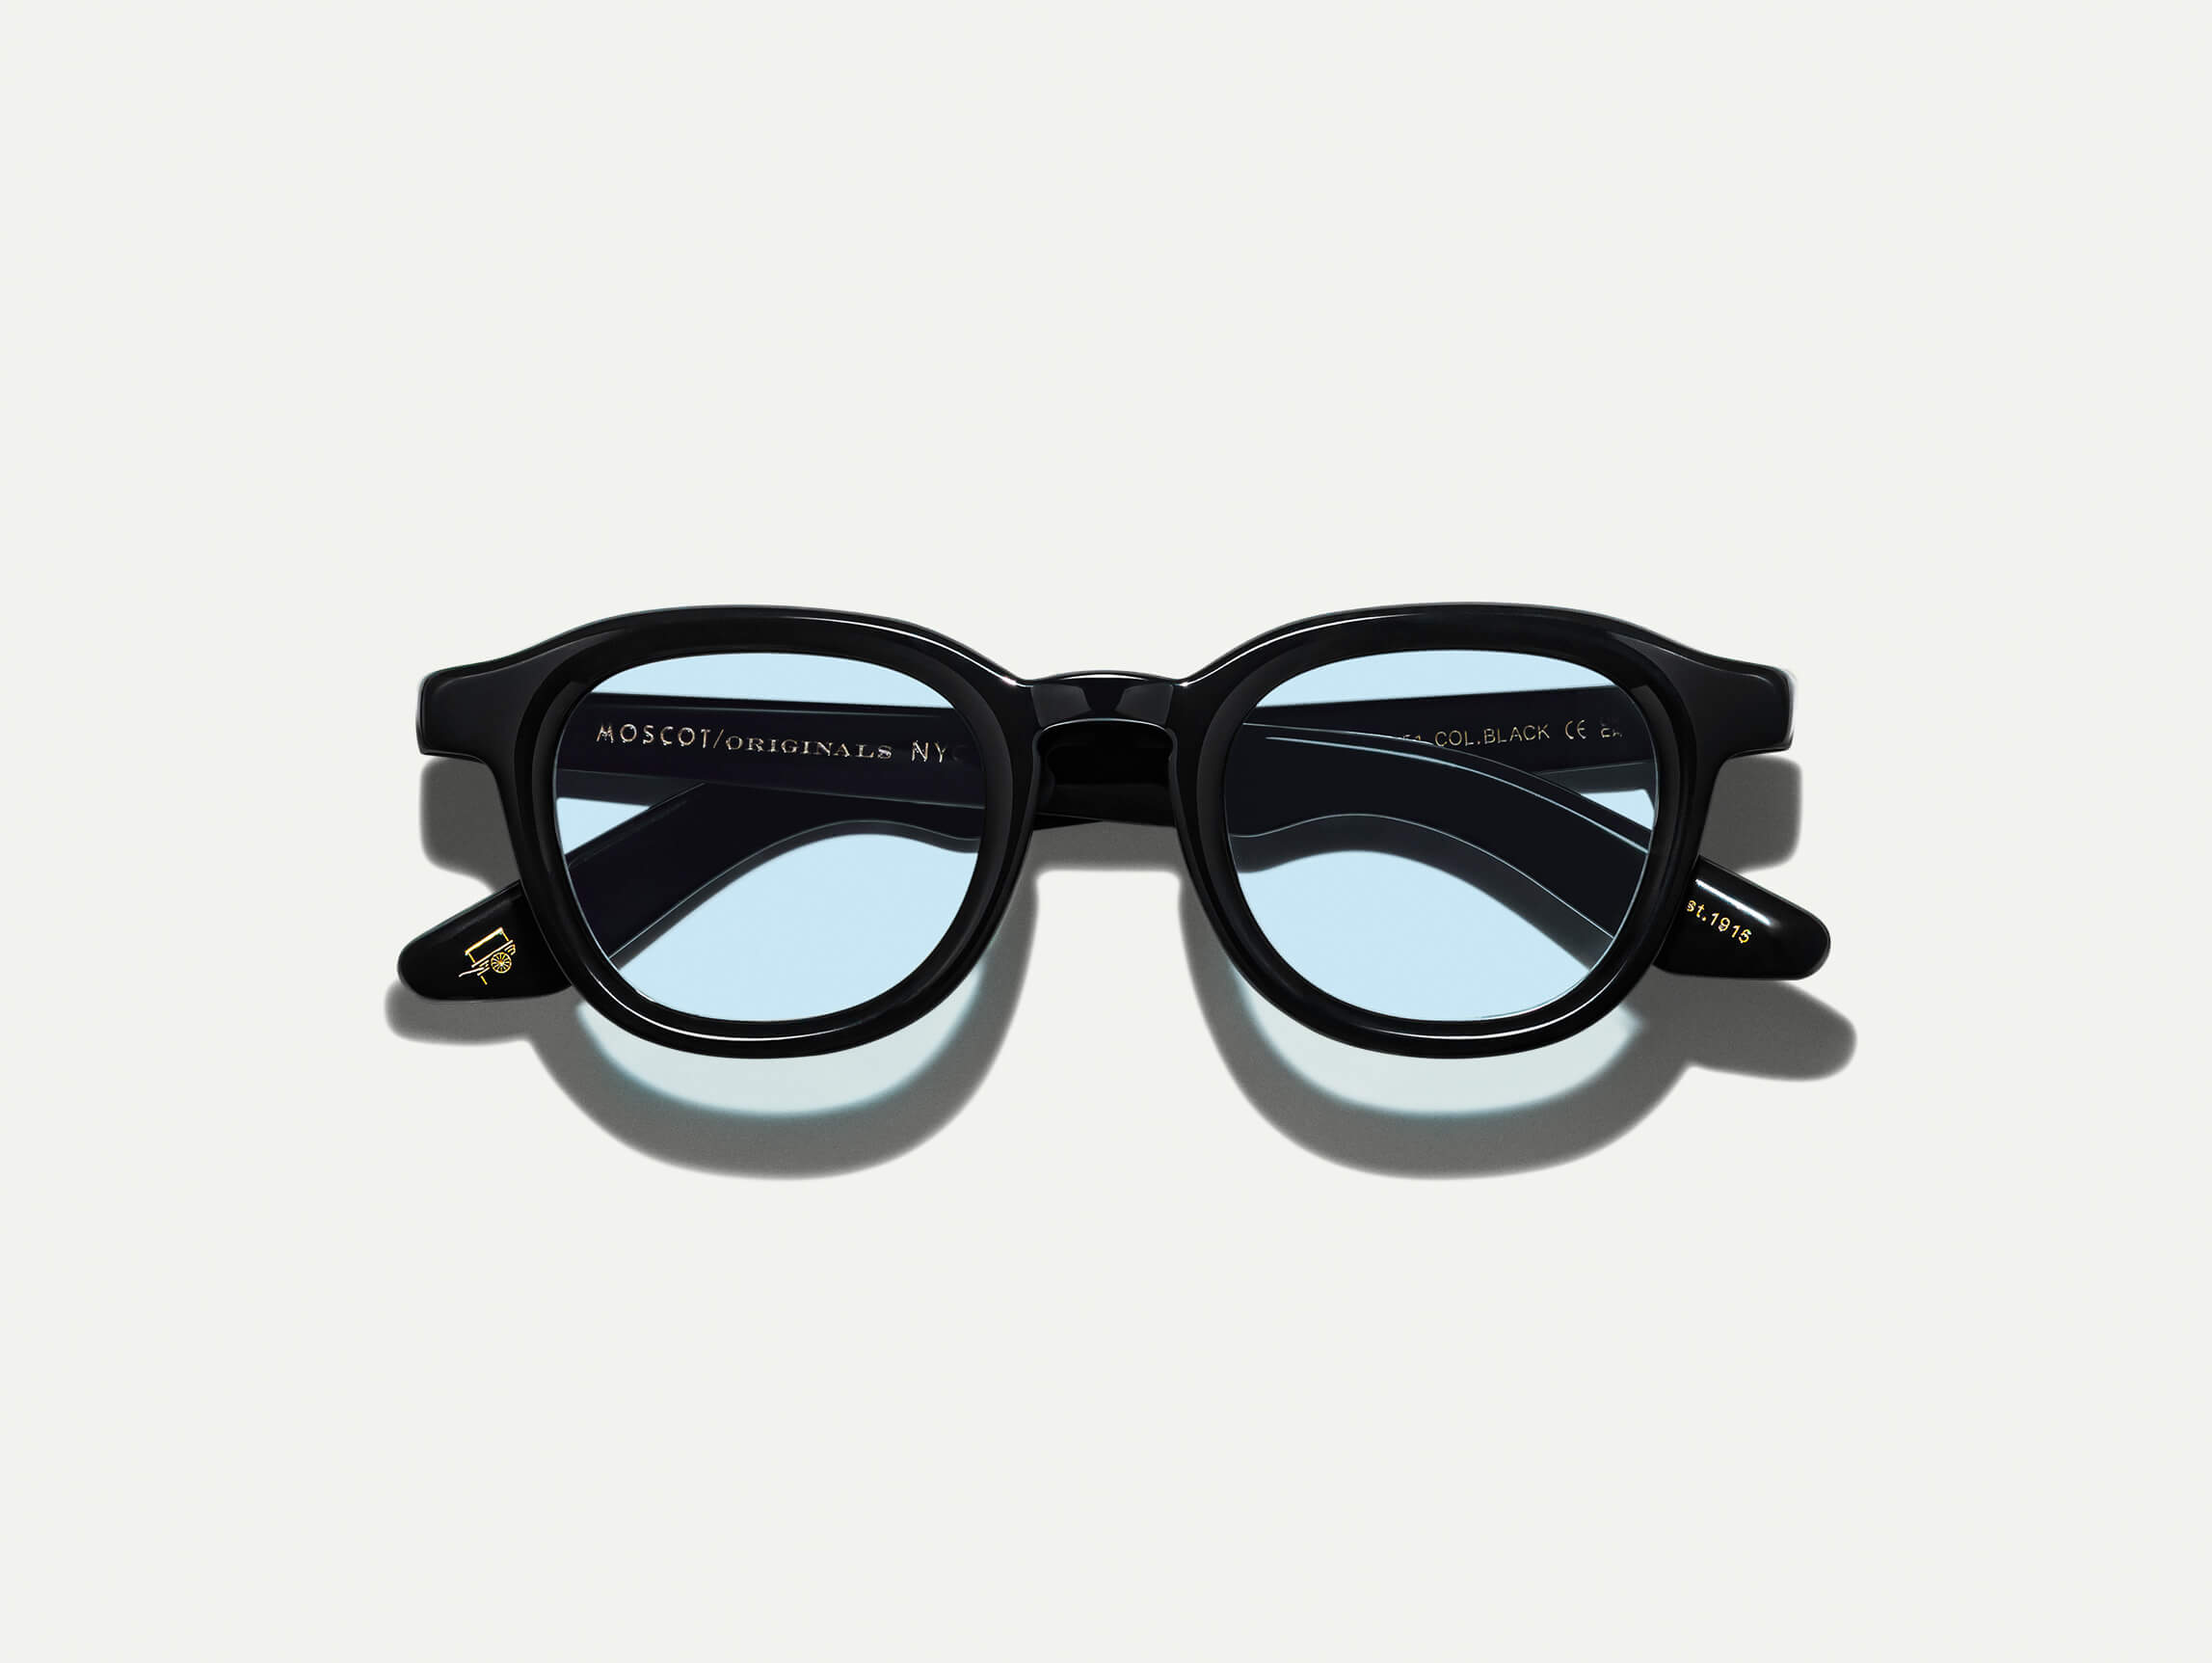 The DAHVEN Black with Bel Air Blue Tinted Lenses